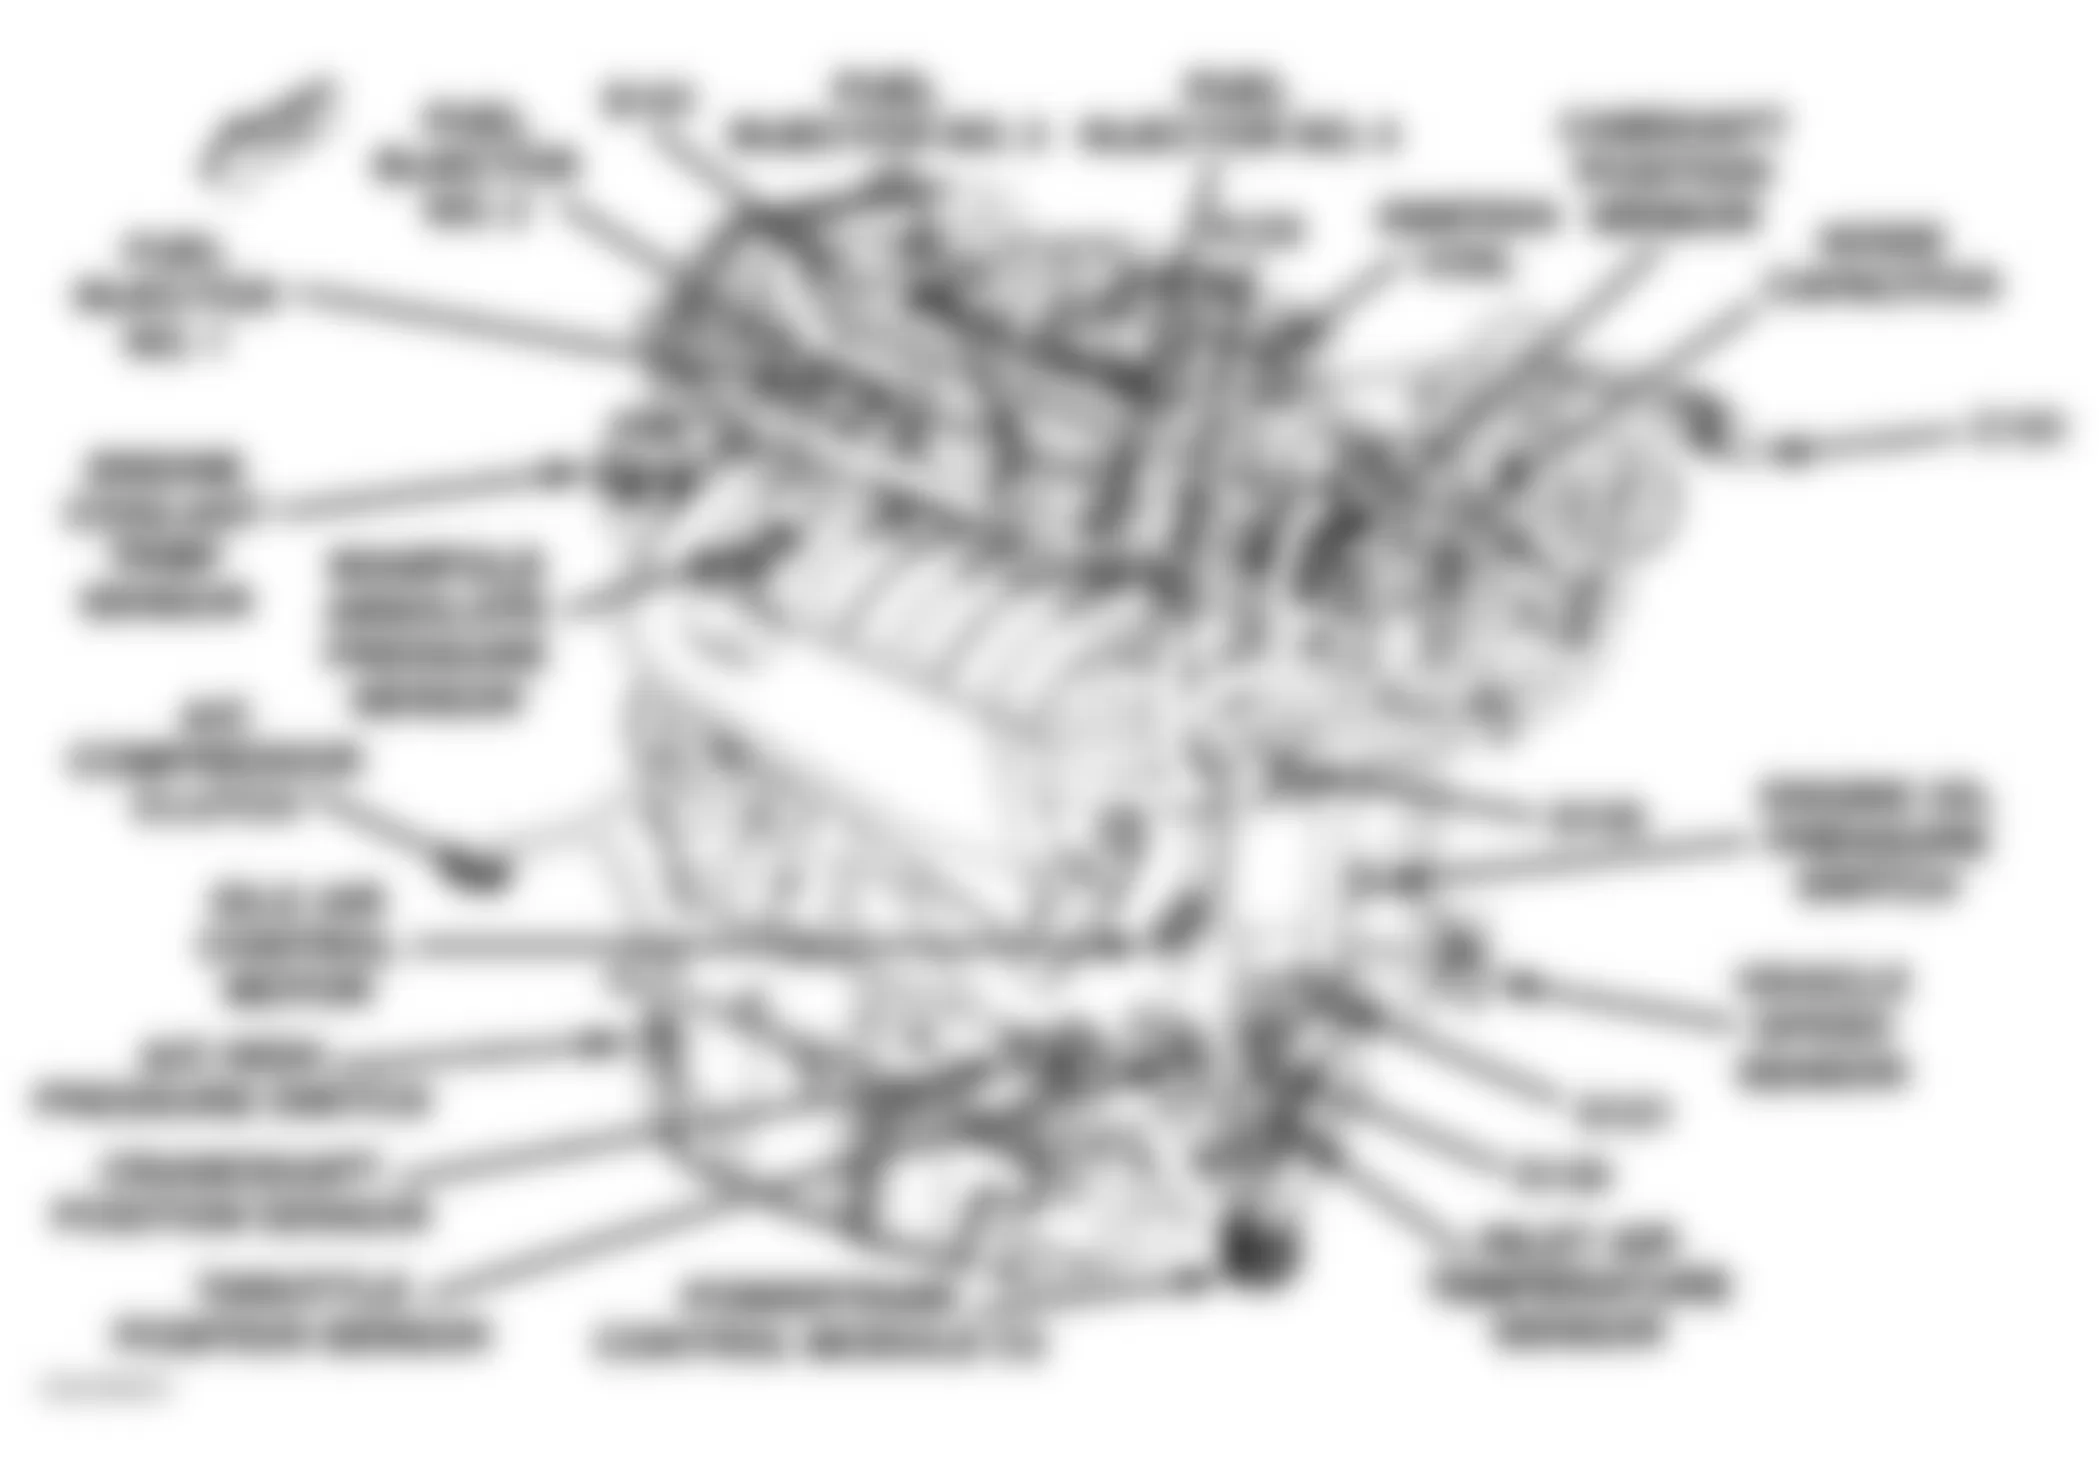 Dodge Neon SE 2005 - Component Locations -  Left Front Of Engine (2.4L Turbo)